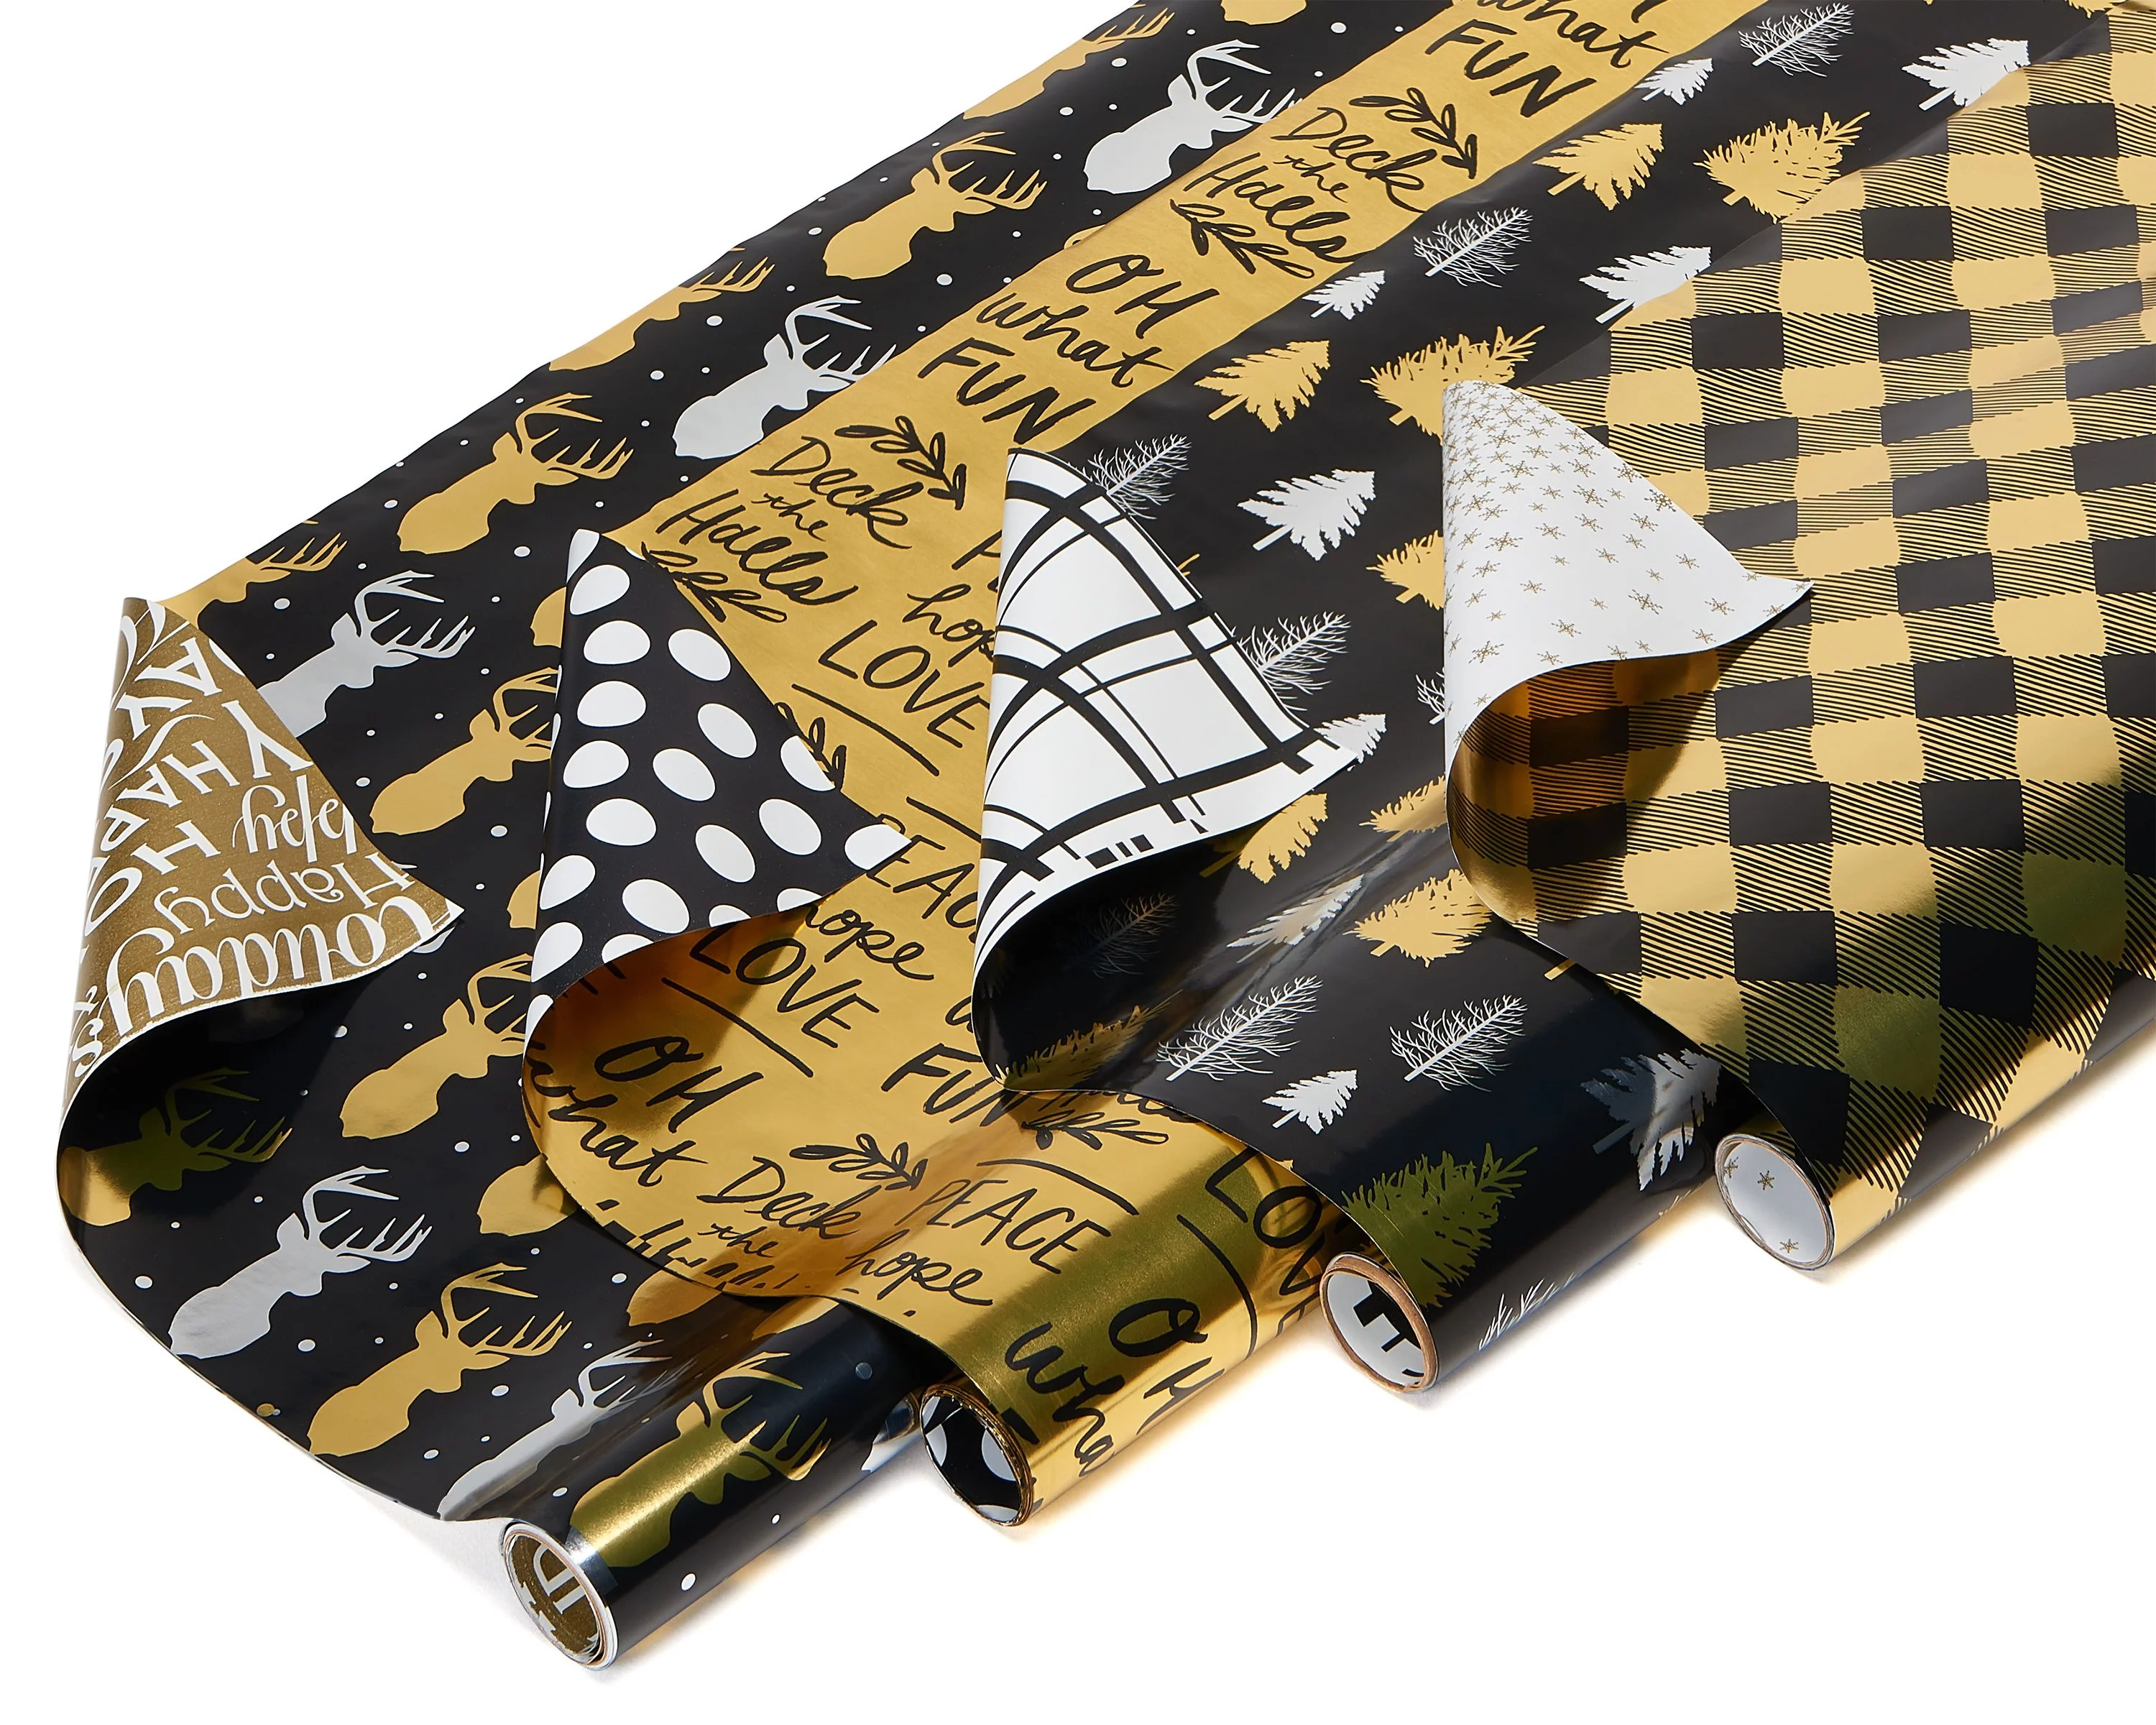 American Greetings Reversible Christmas Foil Wrapping Paper, Black and Gold, Plaid, Trees and Reindeer (4 Pack, 30", 80 sq. ft.)